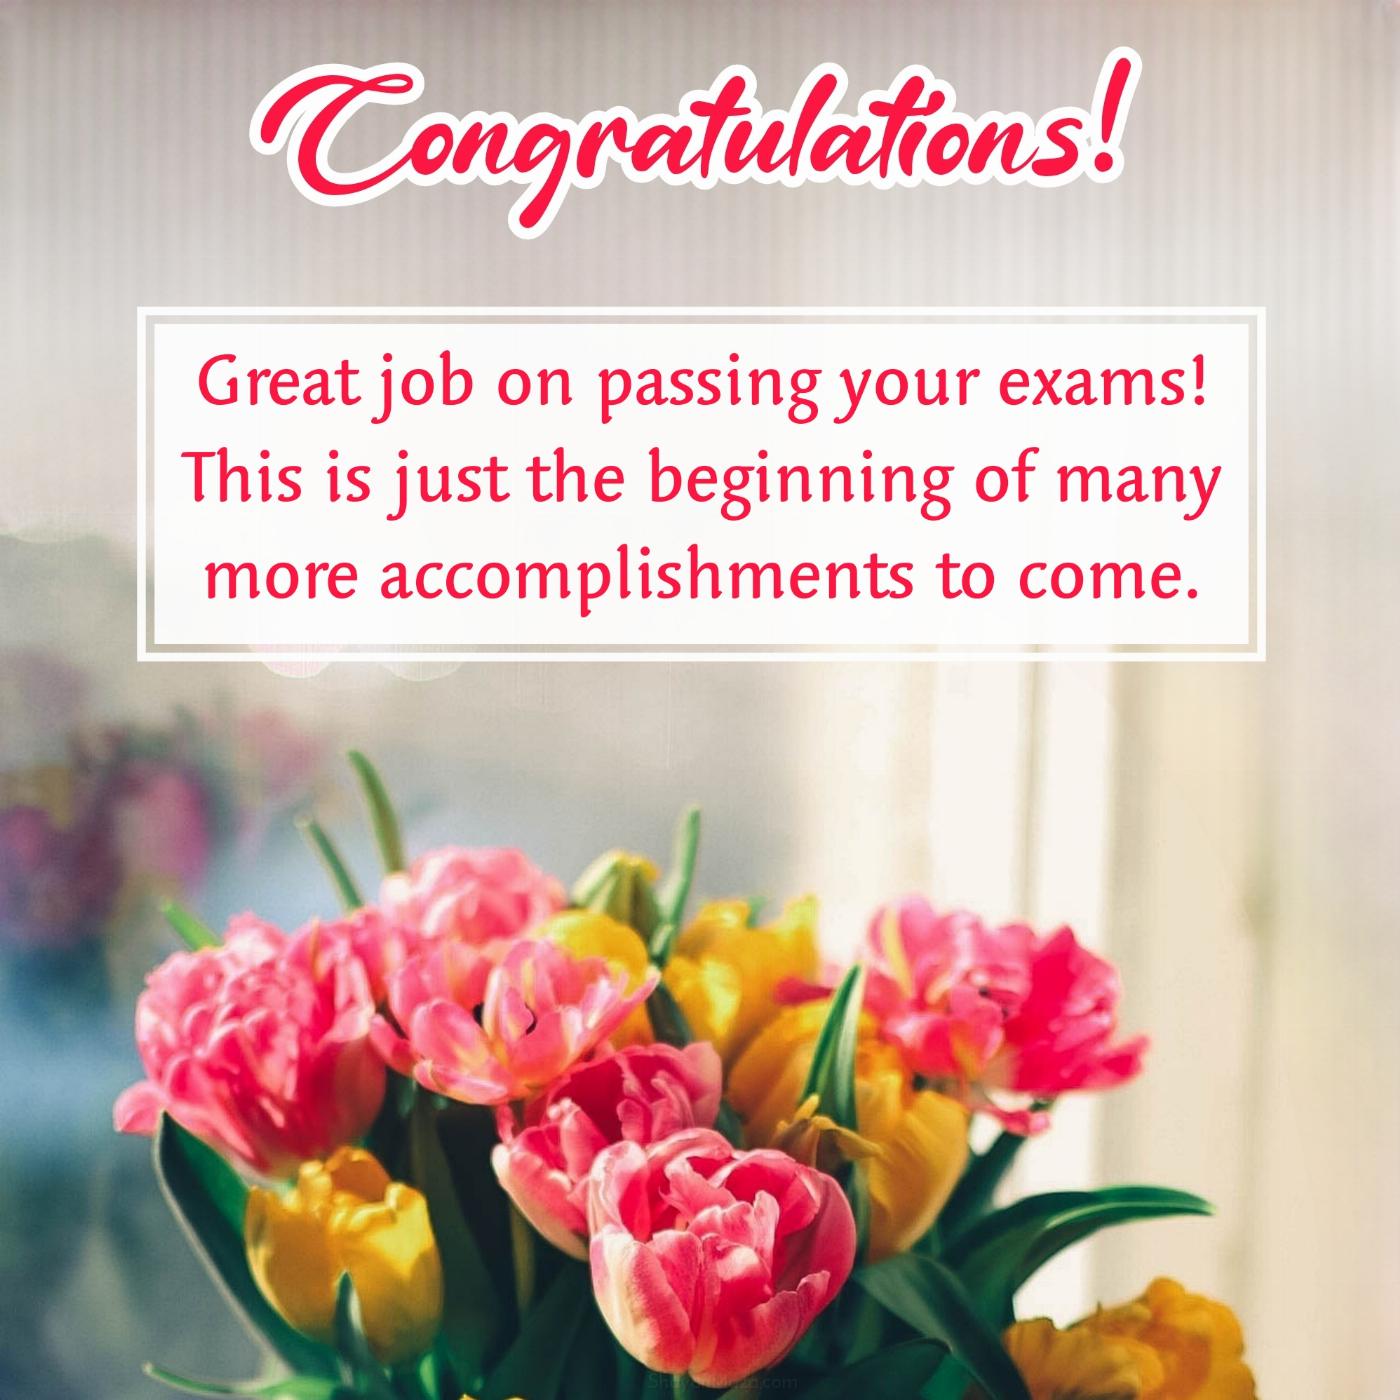 Great job on passing your exams!